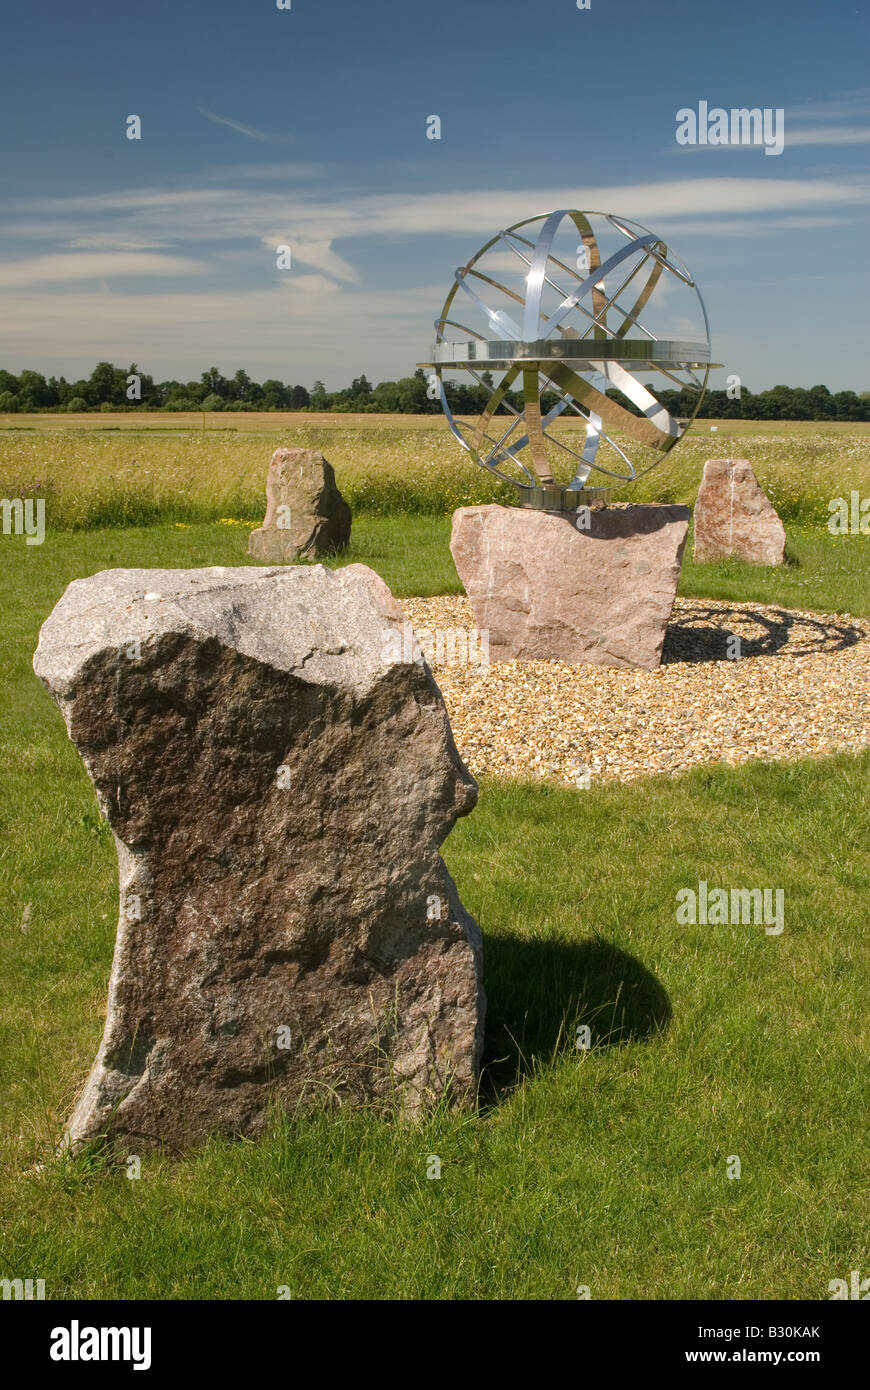 The Armillary Sphere at Eton College Rowing Centre at Dorney Lake Berkshire. Presented to Eton College Stock Photo